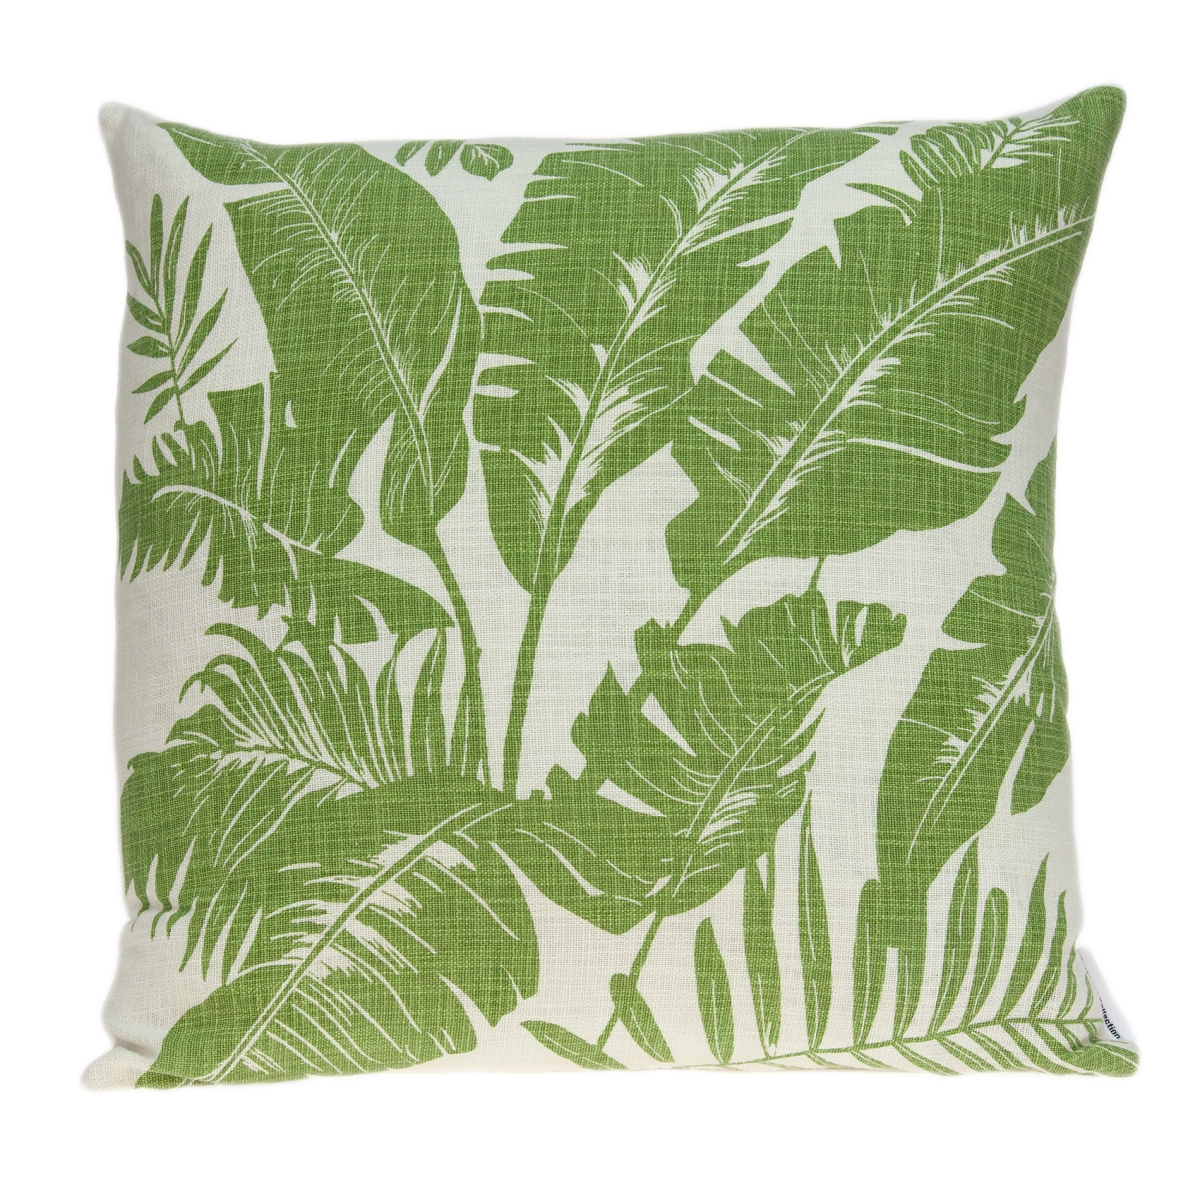 Pild11099c Canary Green & Beige Square Tropical Pillow Cover - 20 X 20 X 0.5 In.